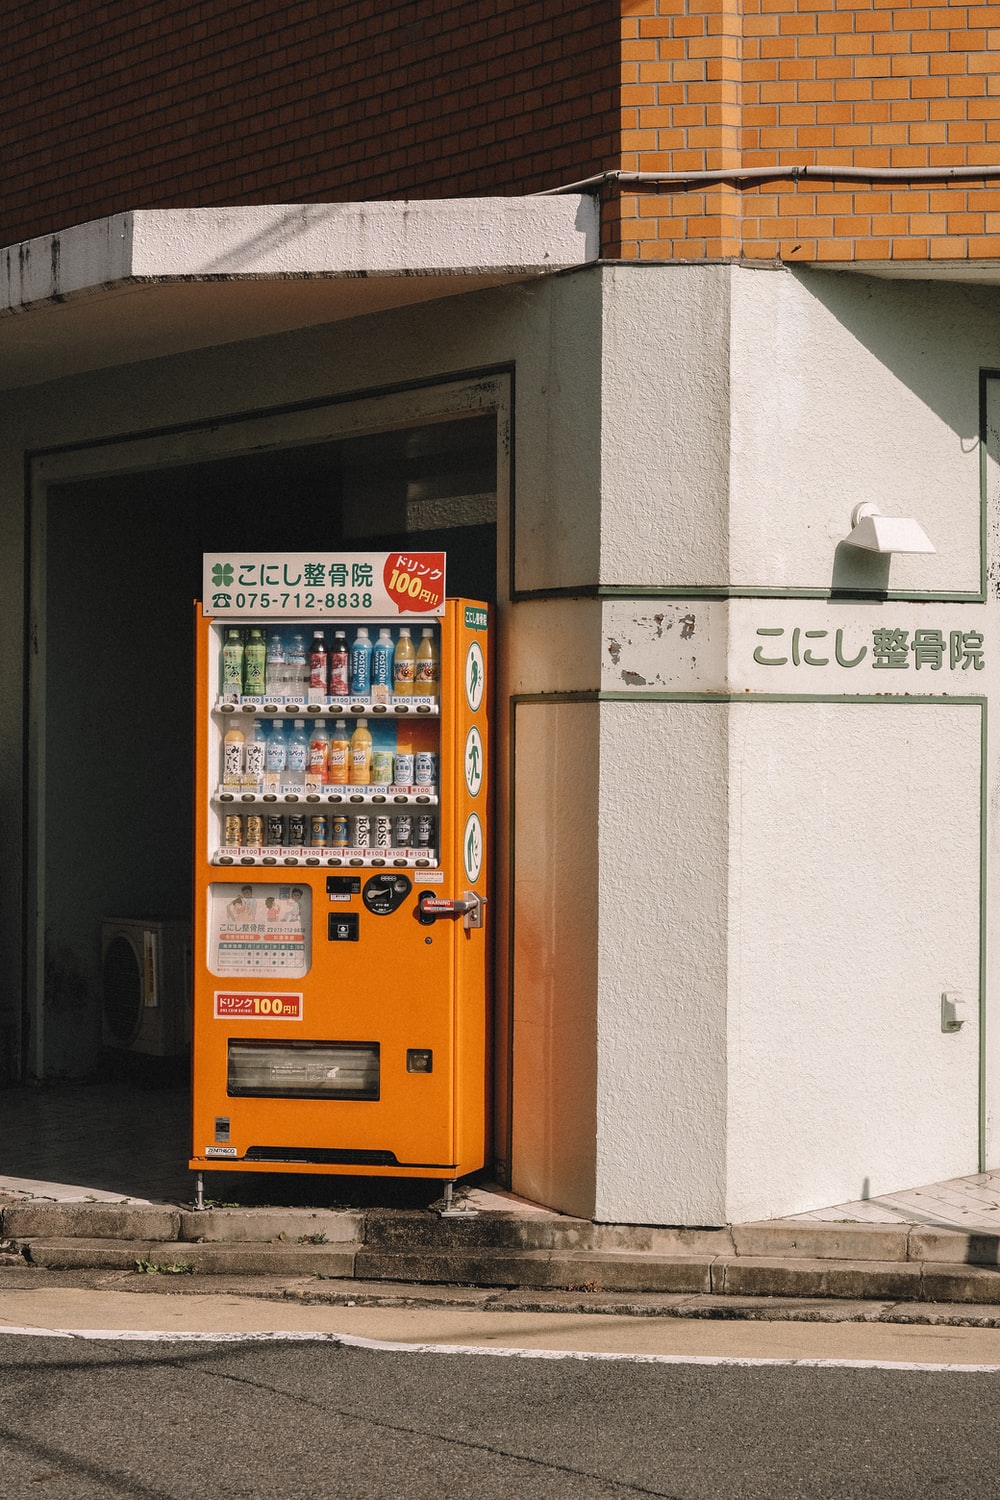 Vending Machine Picture. Download Free Image